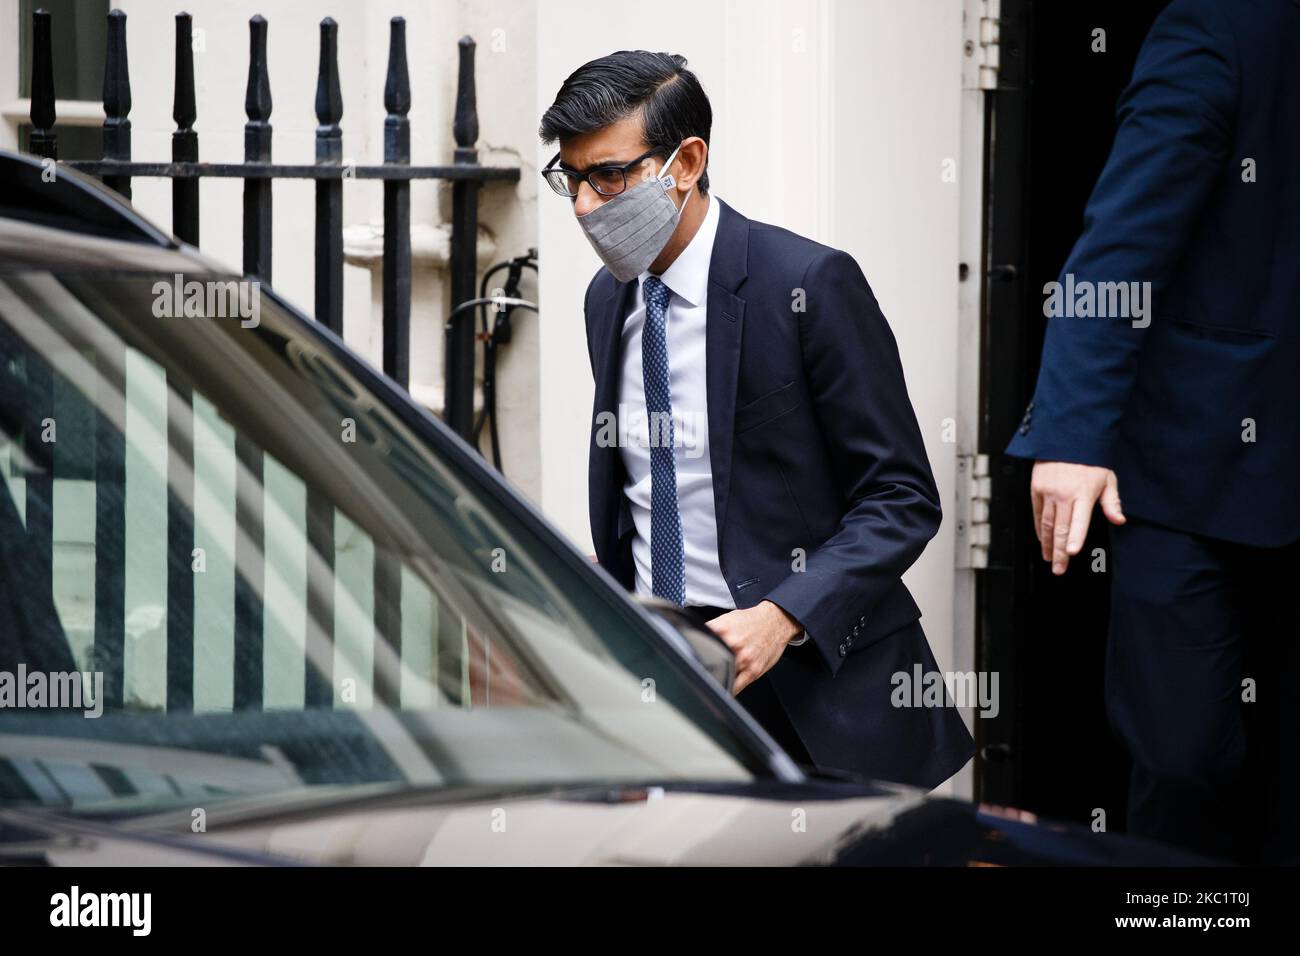 Chancellor Of The Exchequer Rishi Sunak wears a face mask leaving 11 Downing Street in London, England, on October 14, 2020. (Photo by David Cliff/NurPhoto) Stock Photo